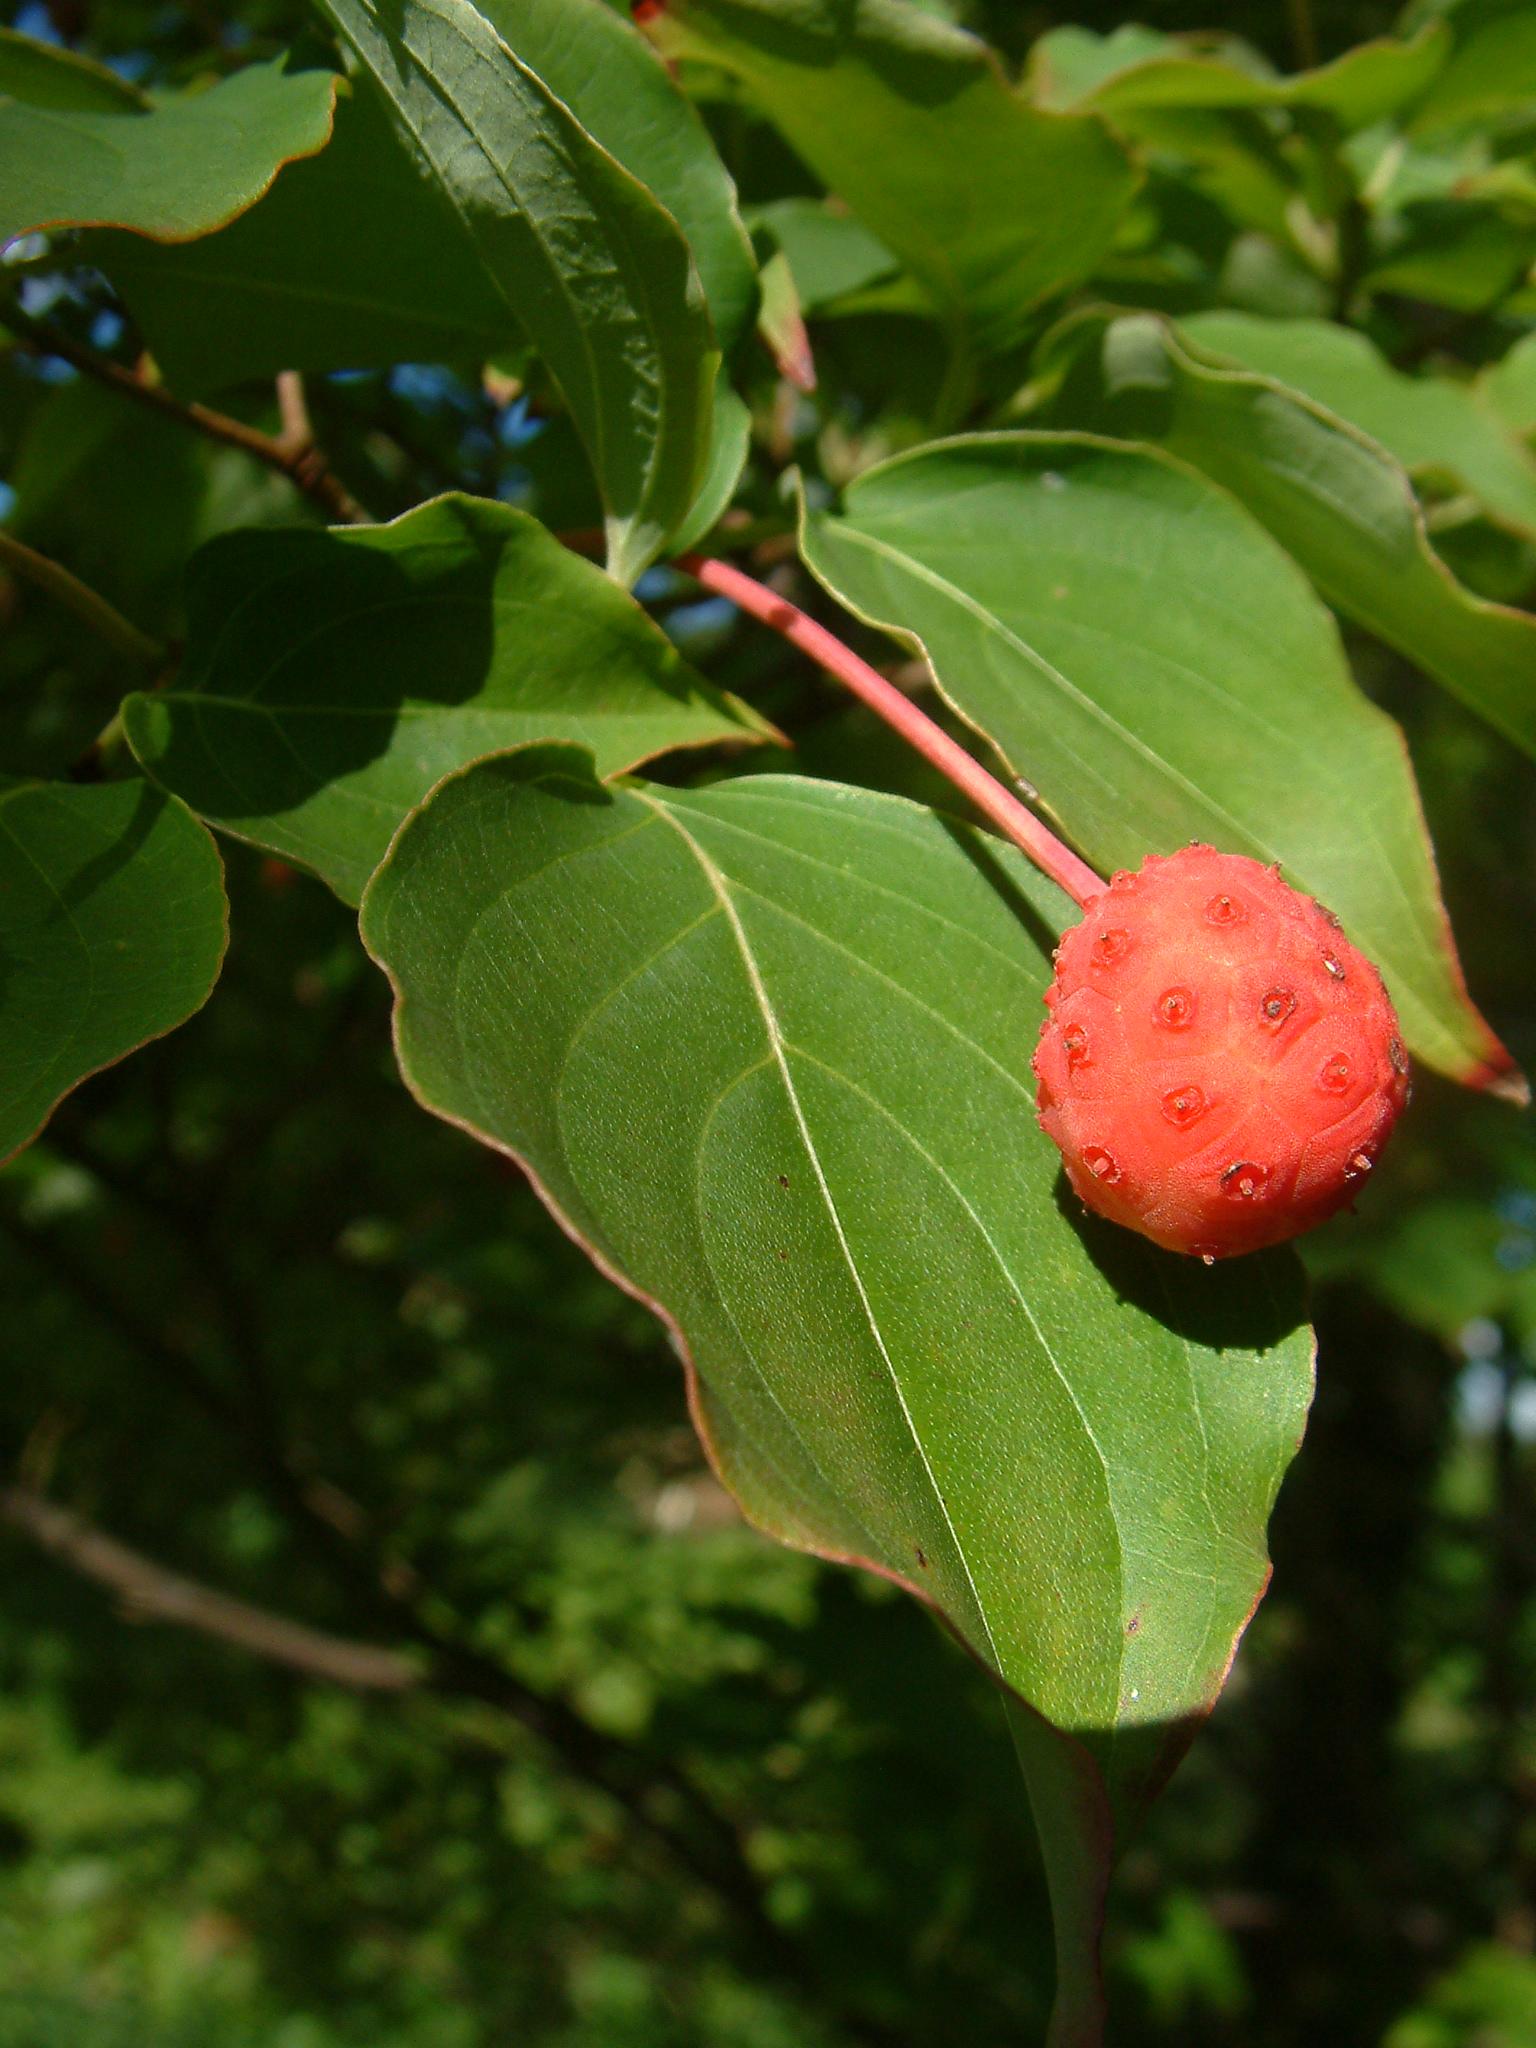 red fruit with pink stem, green leaves with yellow veins and brown branches